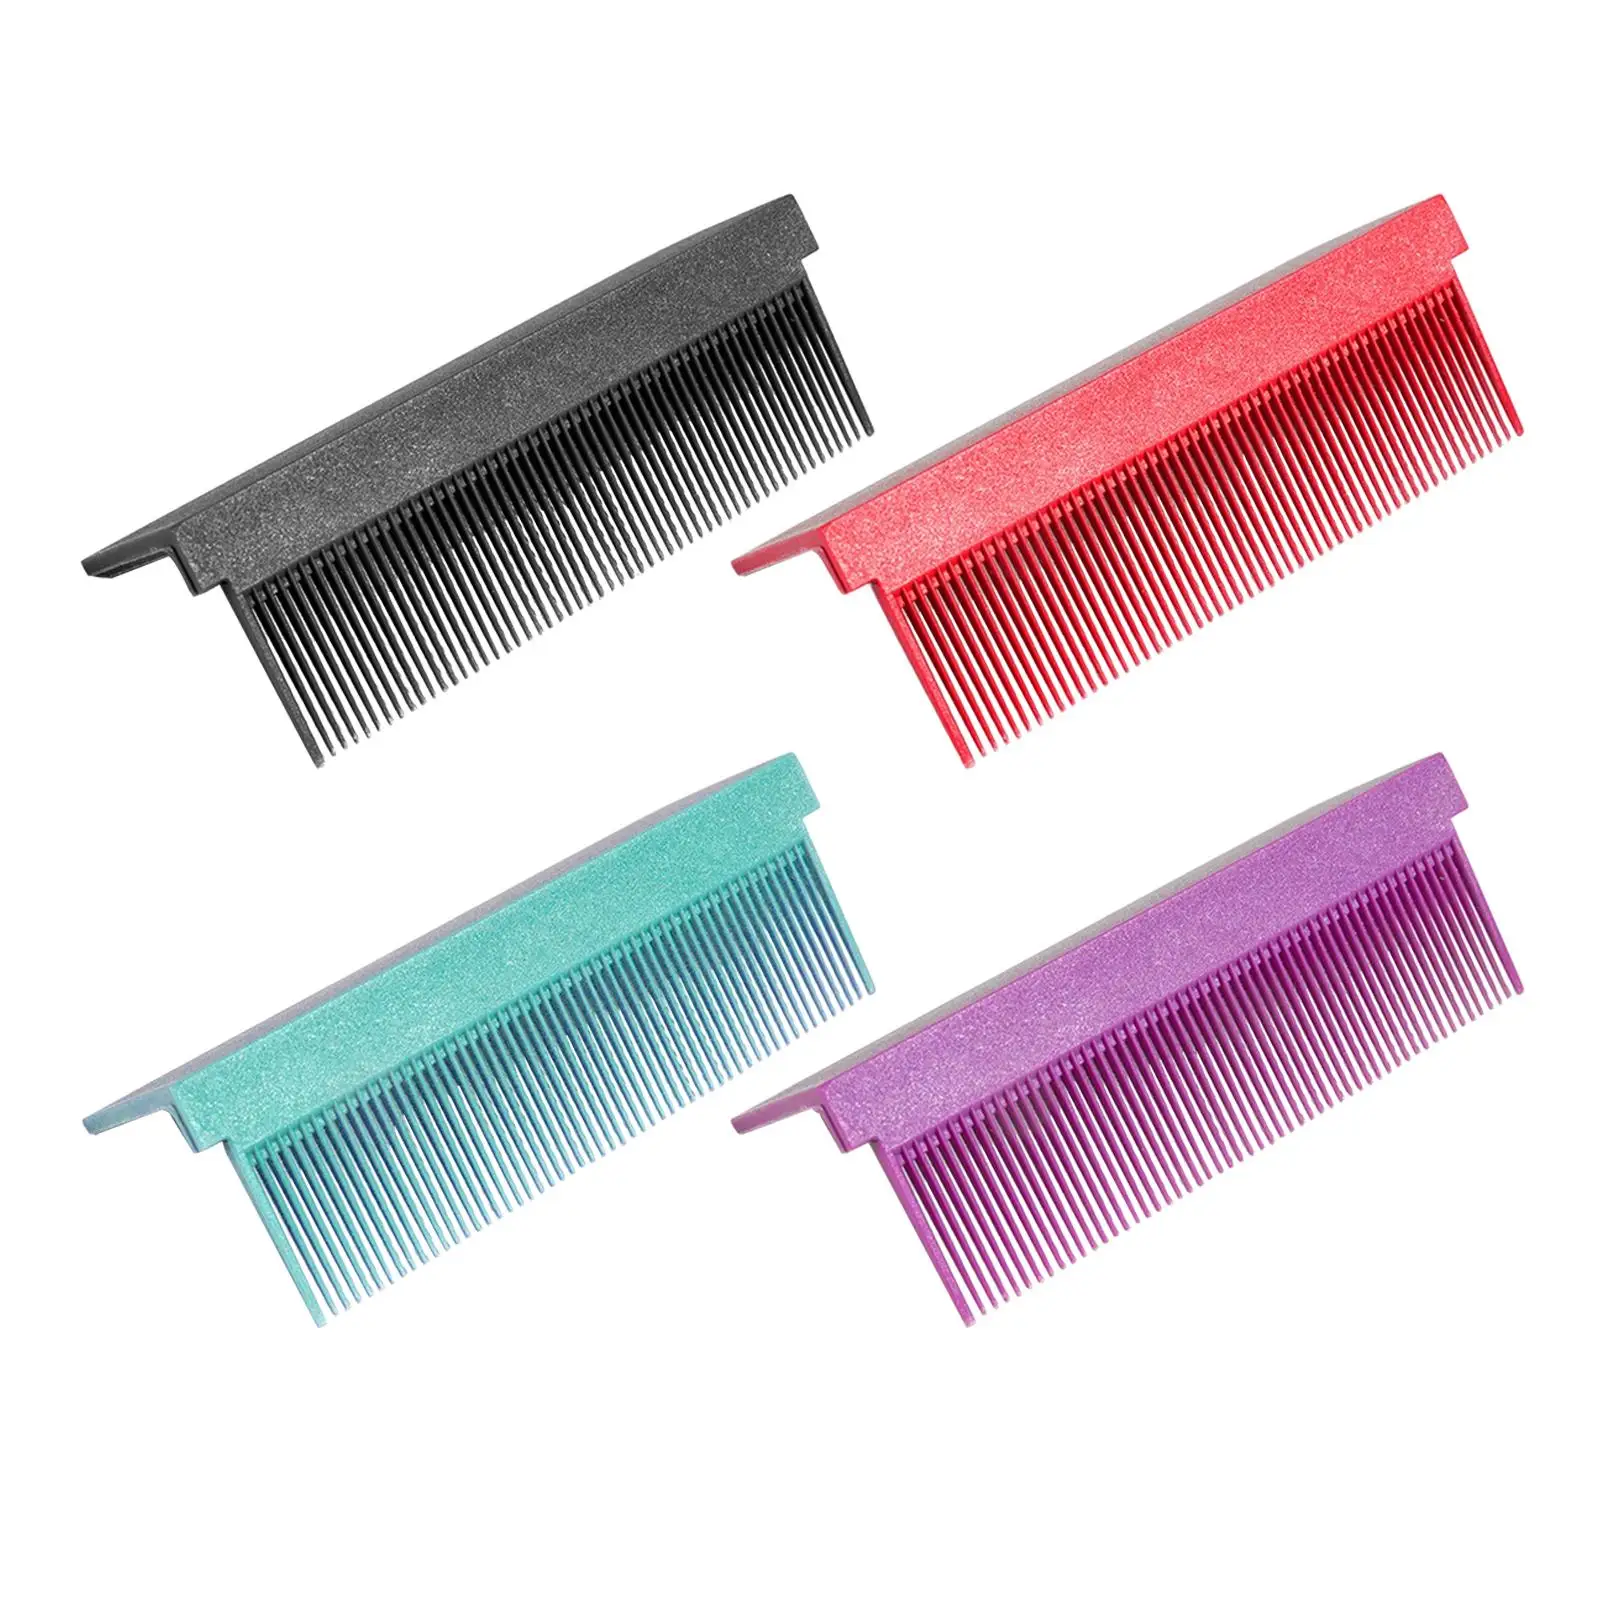 Plastic Comb Accessory for Folding Hair Straightener Washable Lightweight Easily Carry